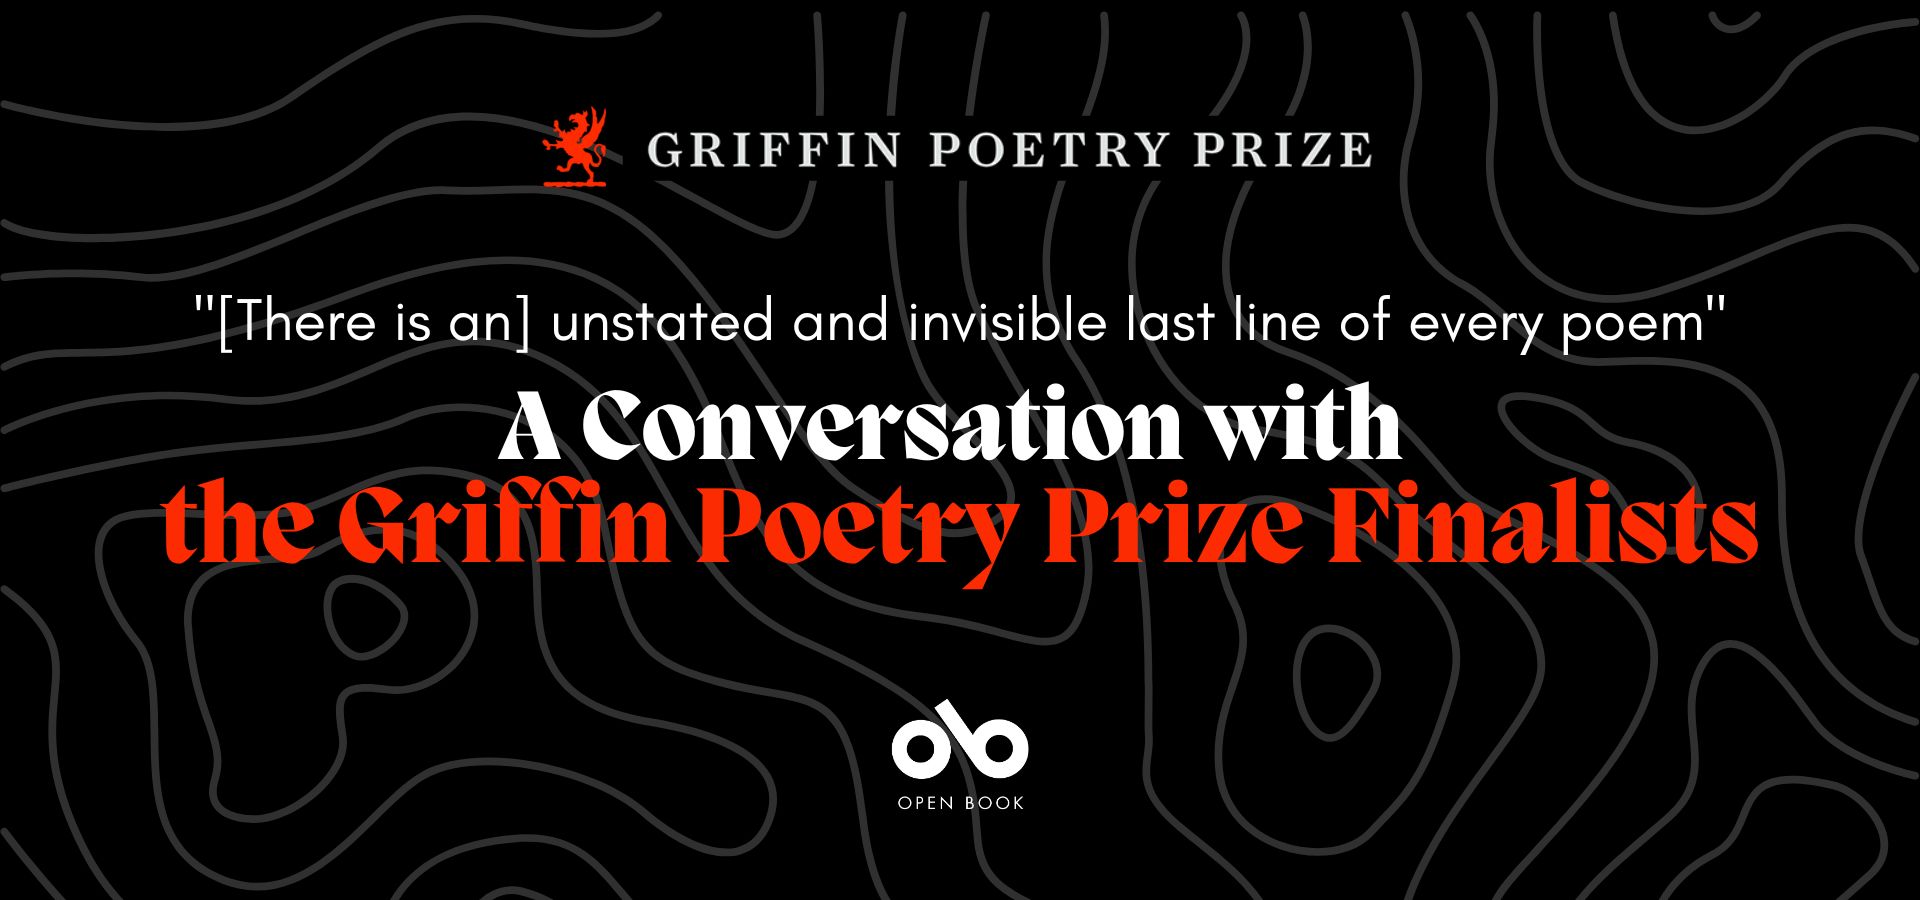 black banner image with the griffin poetry prize logo at the top and open book logo at the bottom. Text in between reads "[there is an] understated and invisible last line of every poem" and "a conversation with the Griffin Poetry Prize finalists"